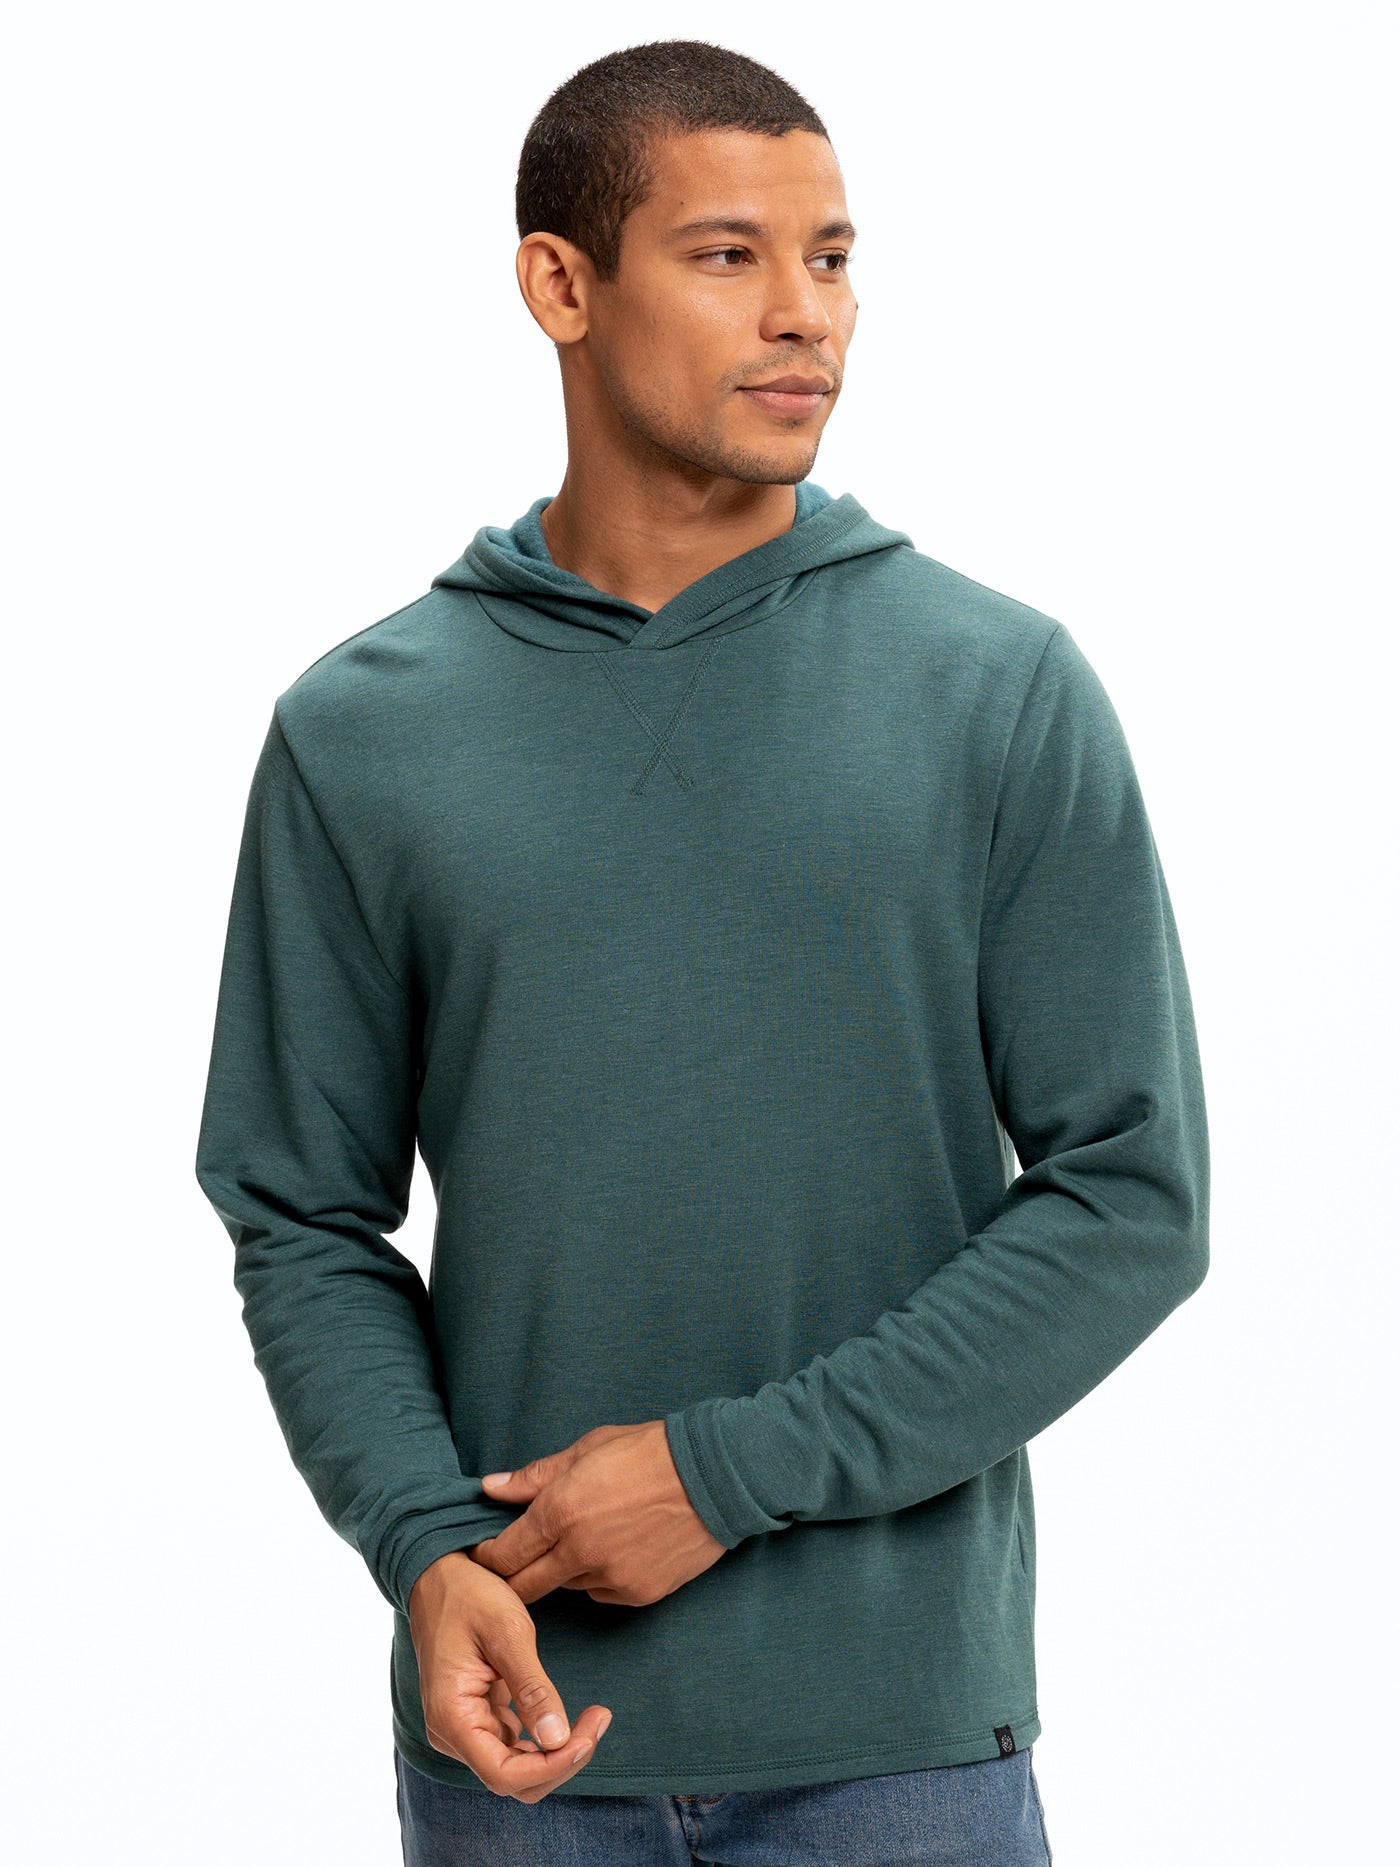 Dex Featherweight Pullover Lounge Hoodie Mens Outerwear Sweatshirt Threads 4 Thought 